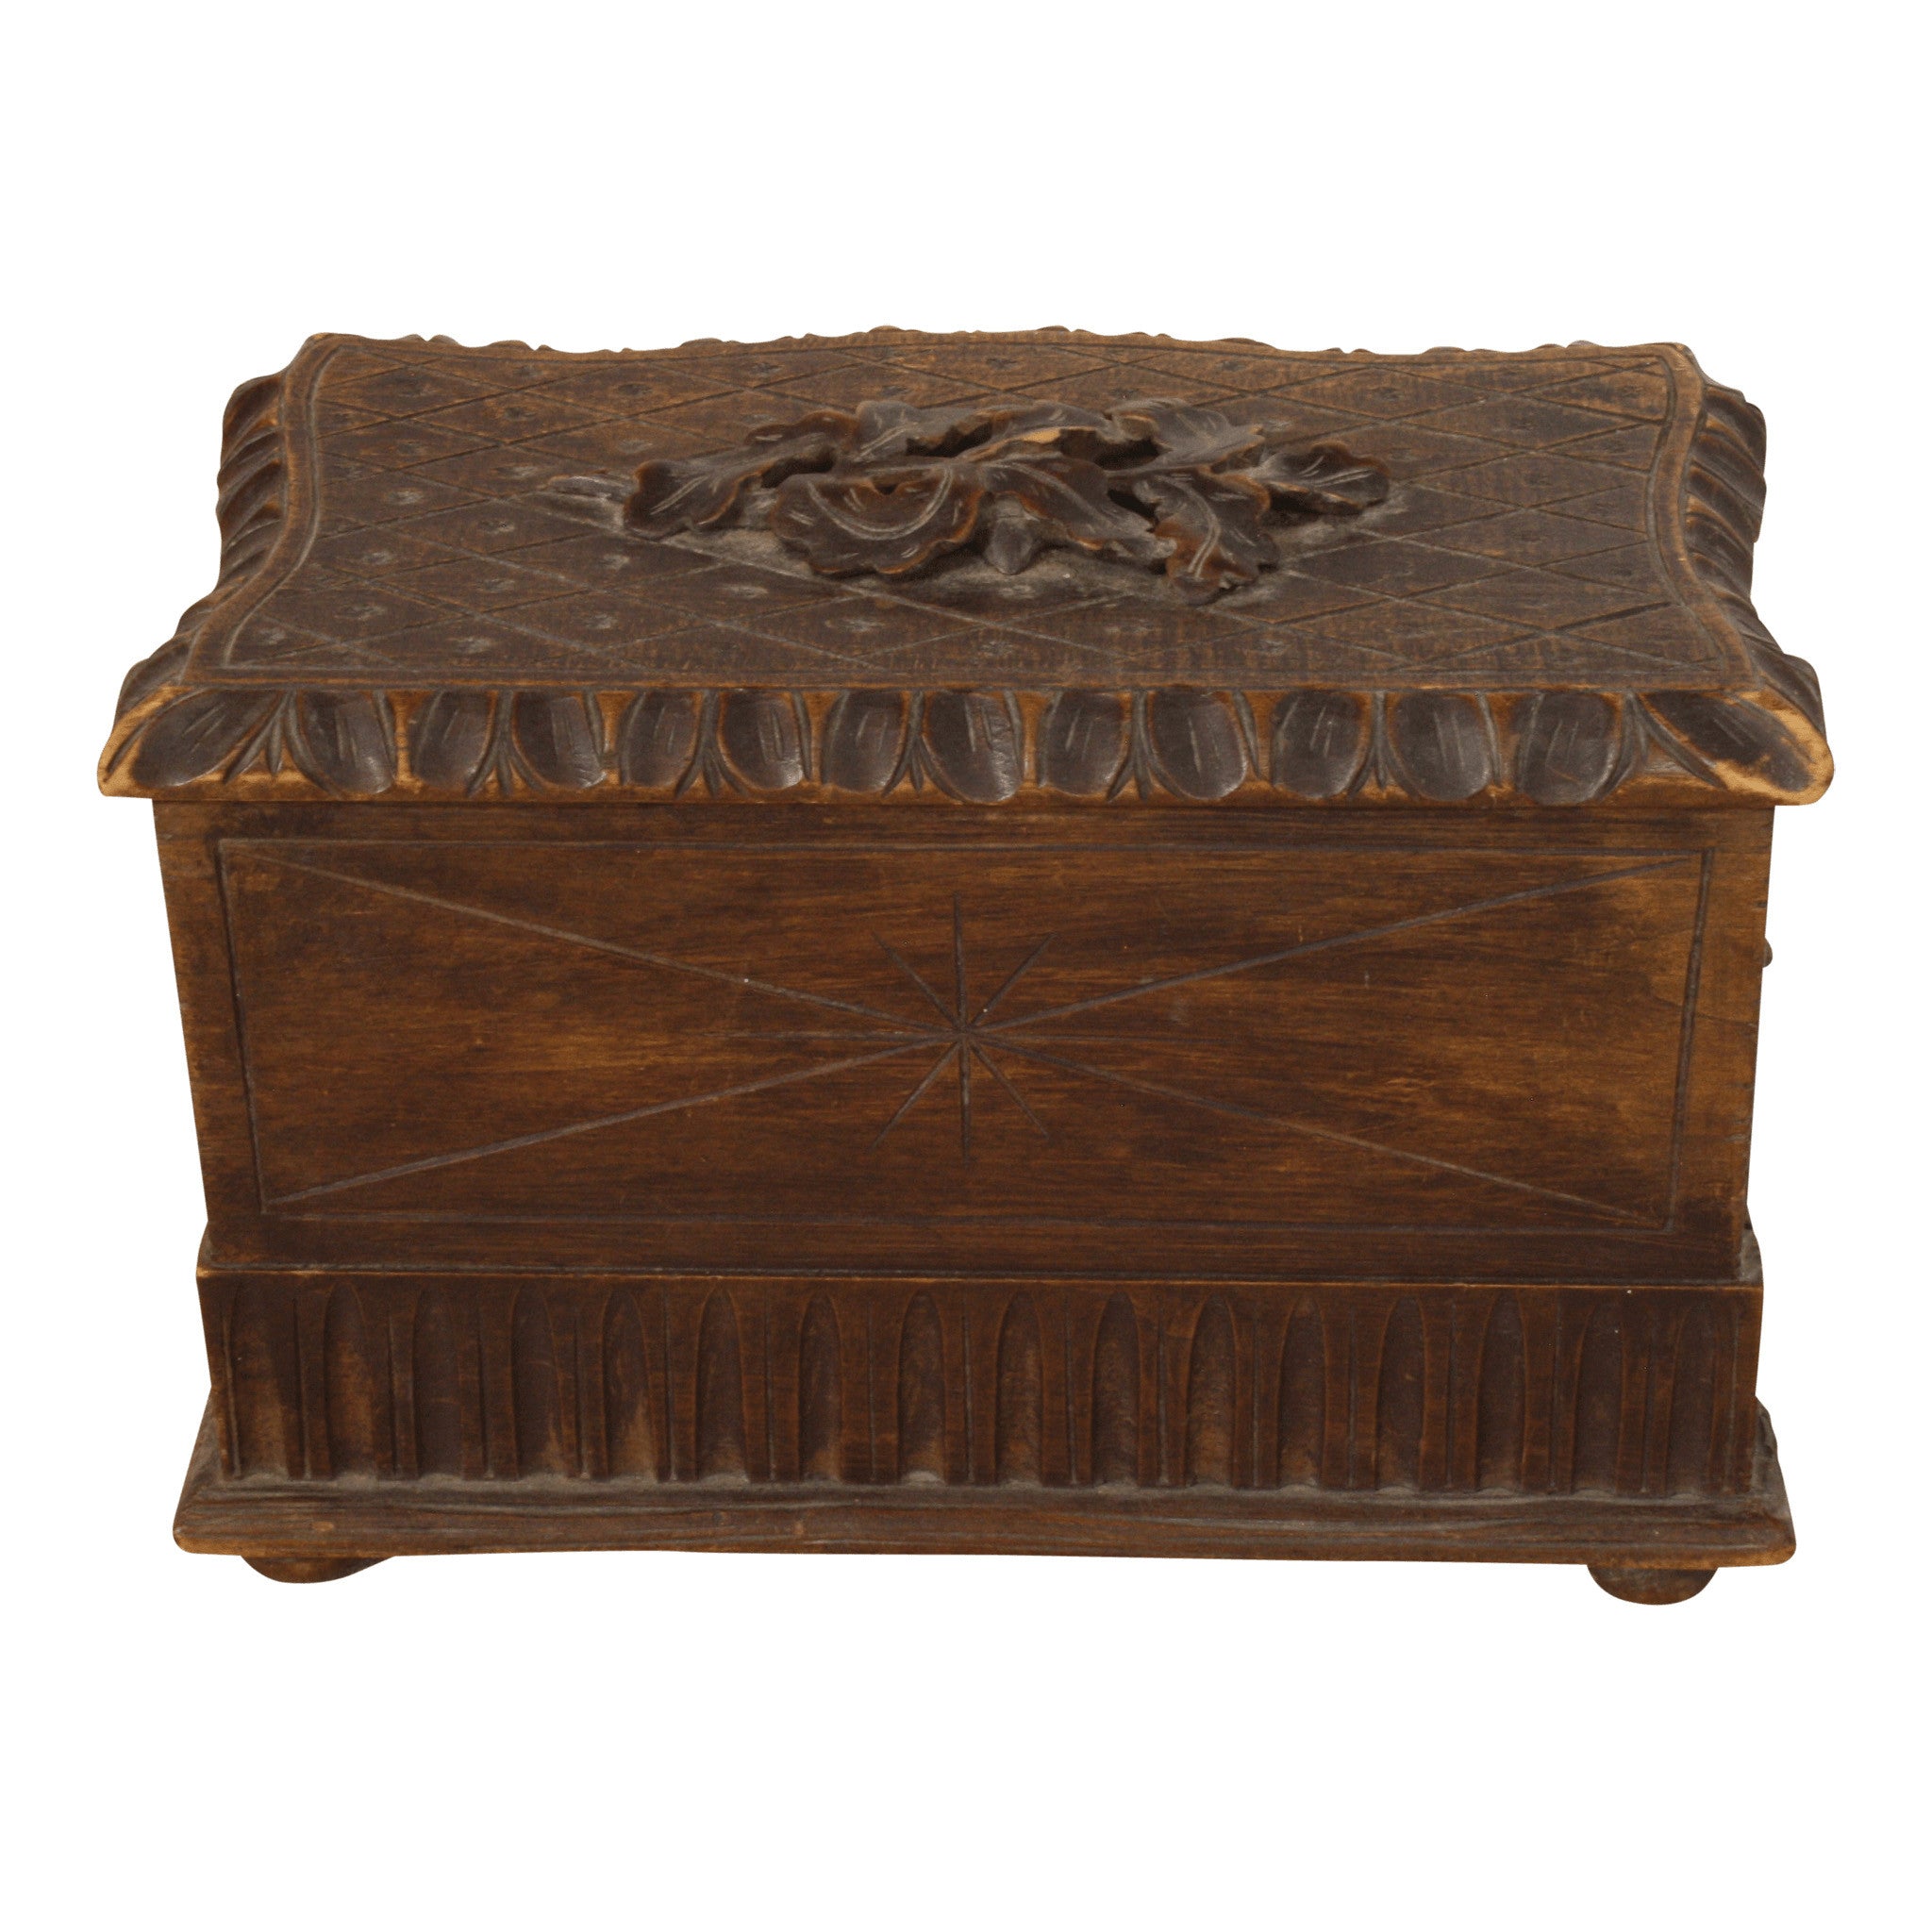 ski-country-antiques - Petite Carved Jewelry Box